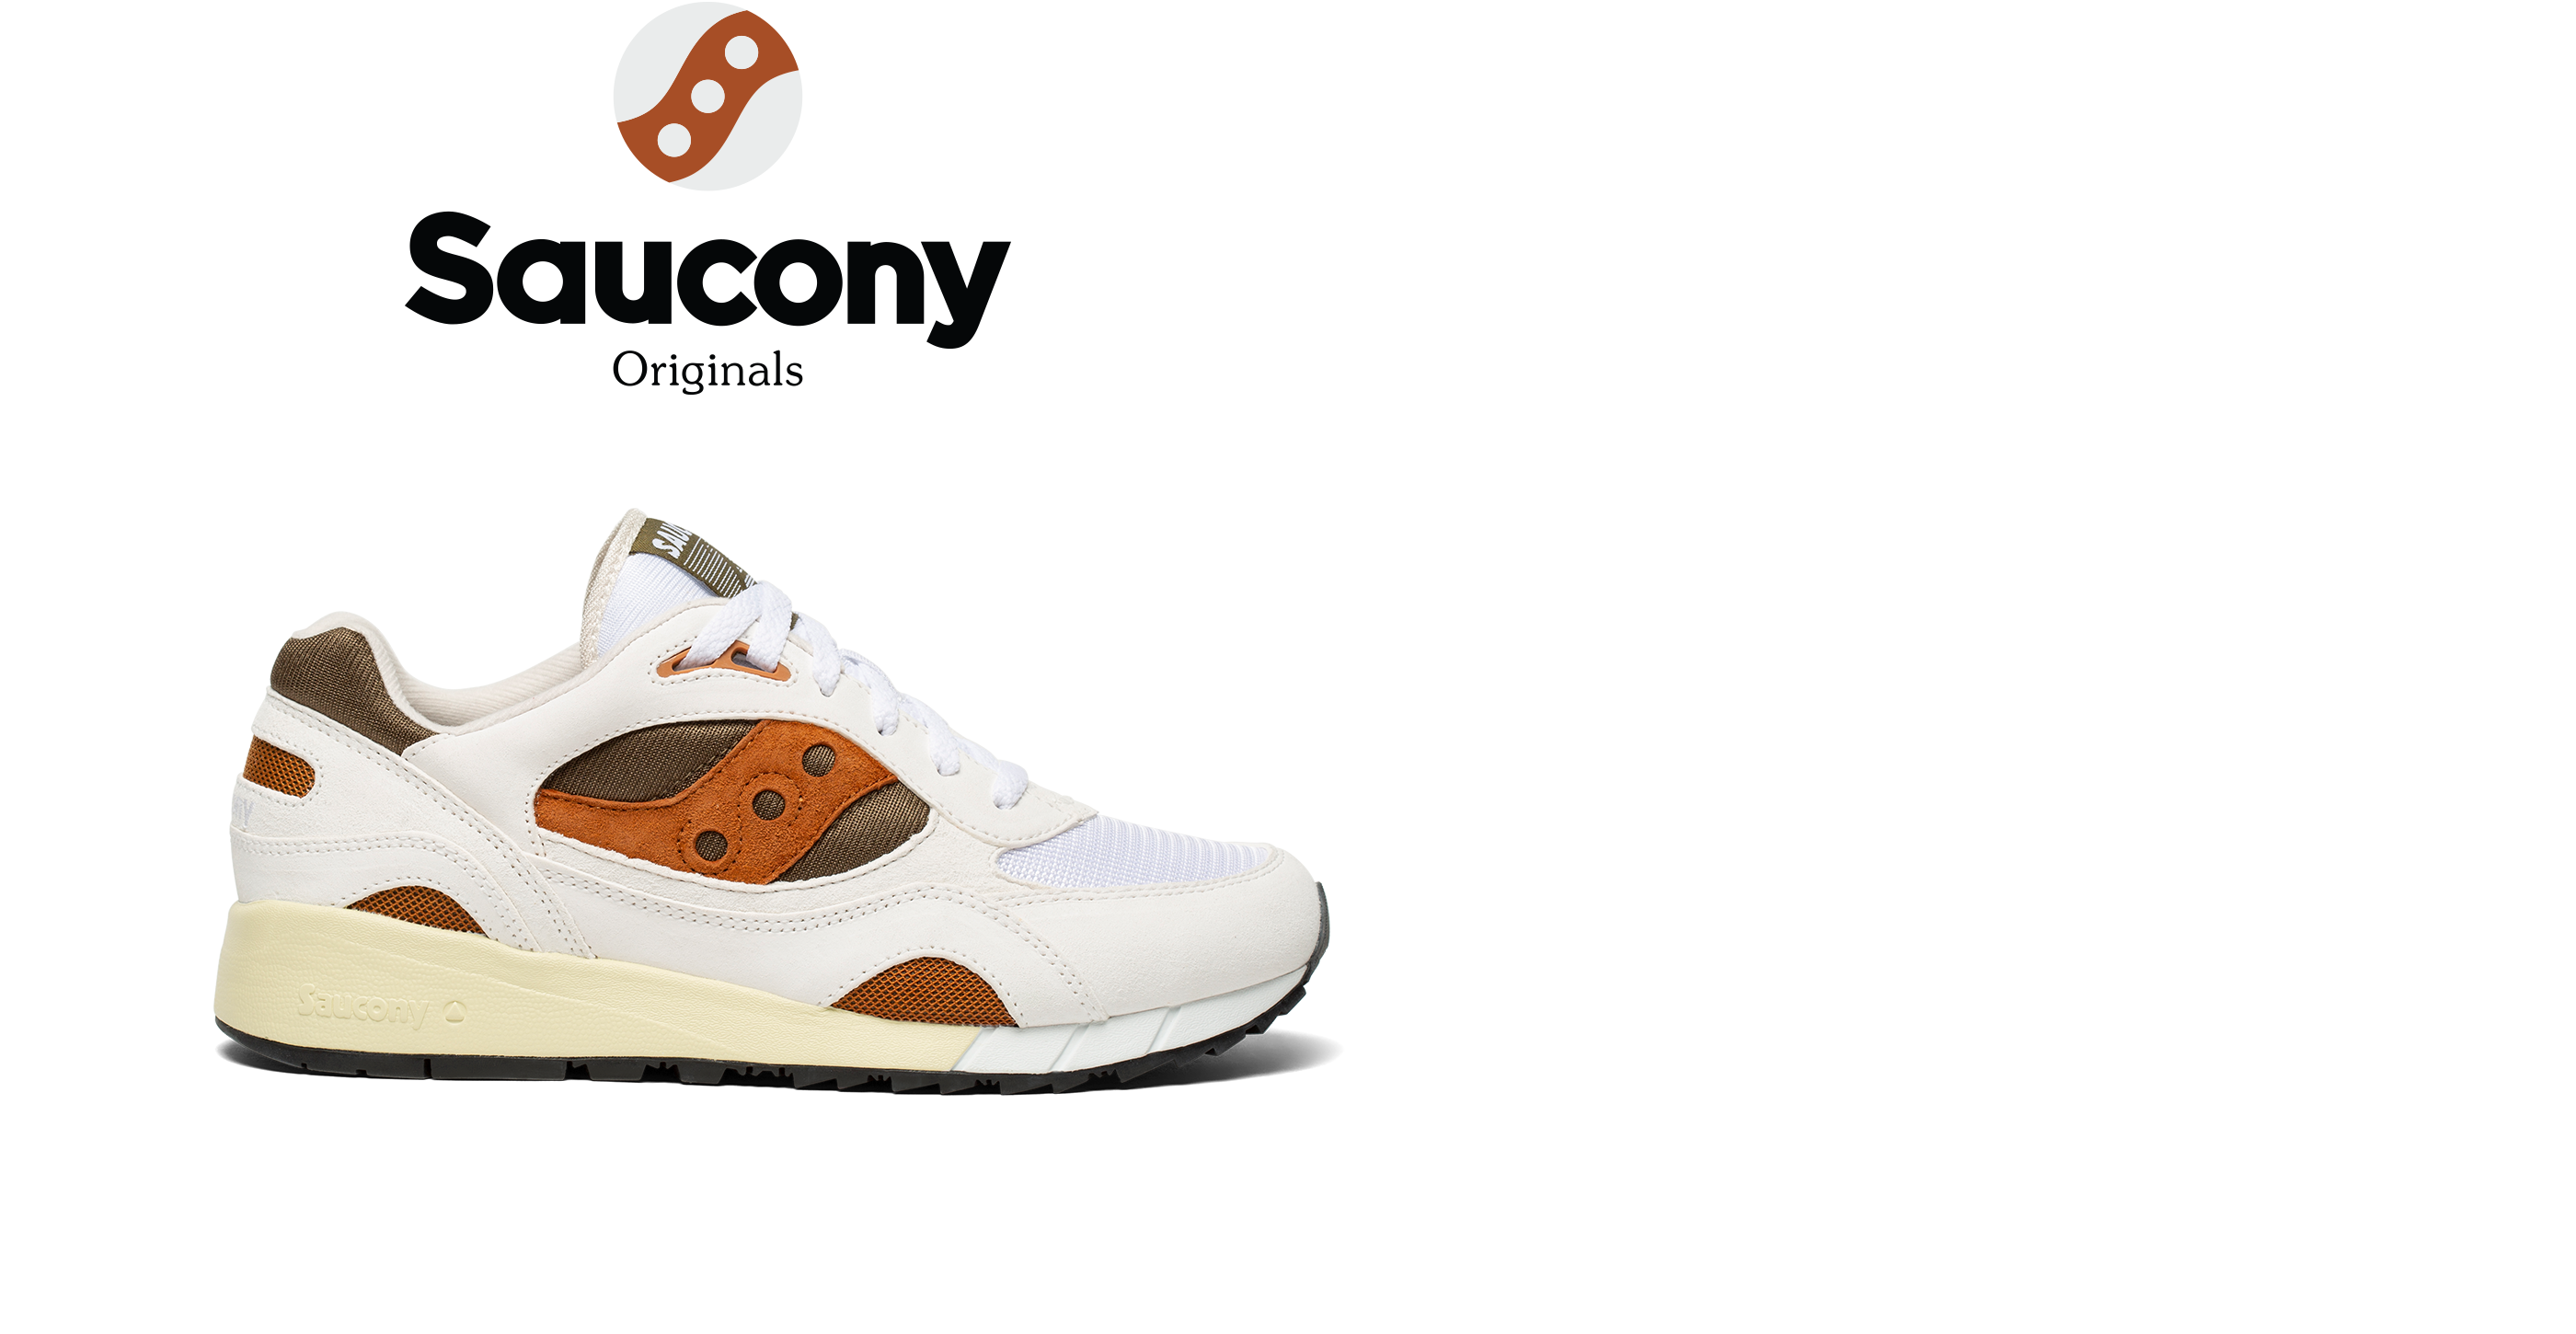 saucony shoes limited edition